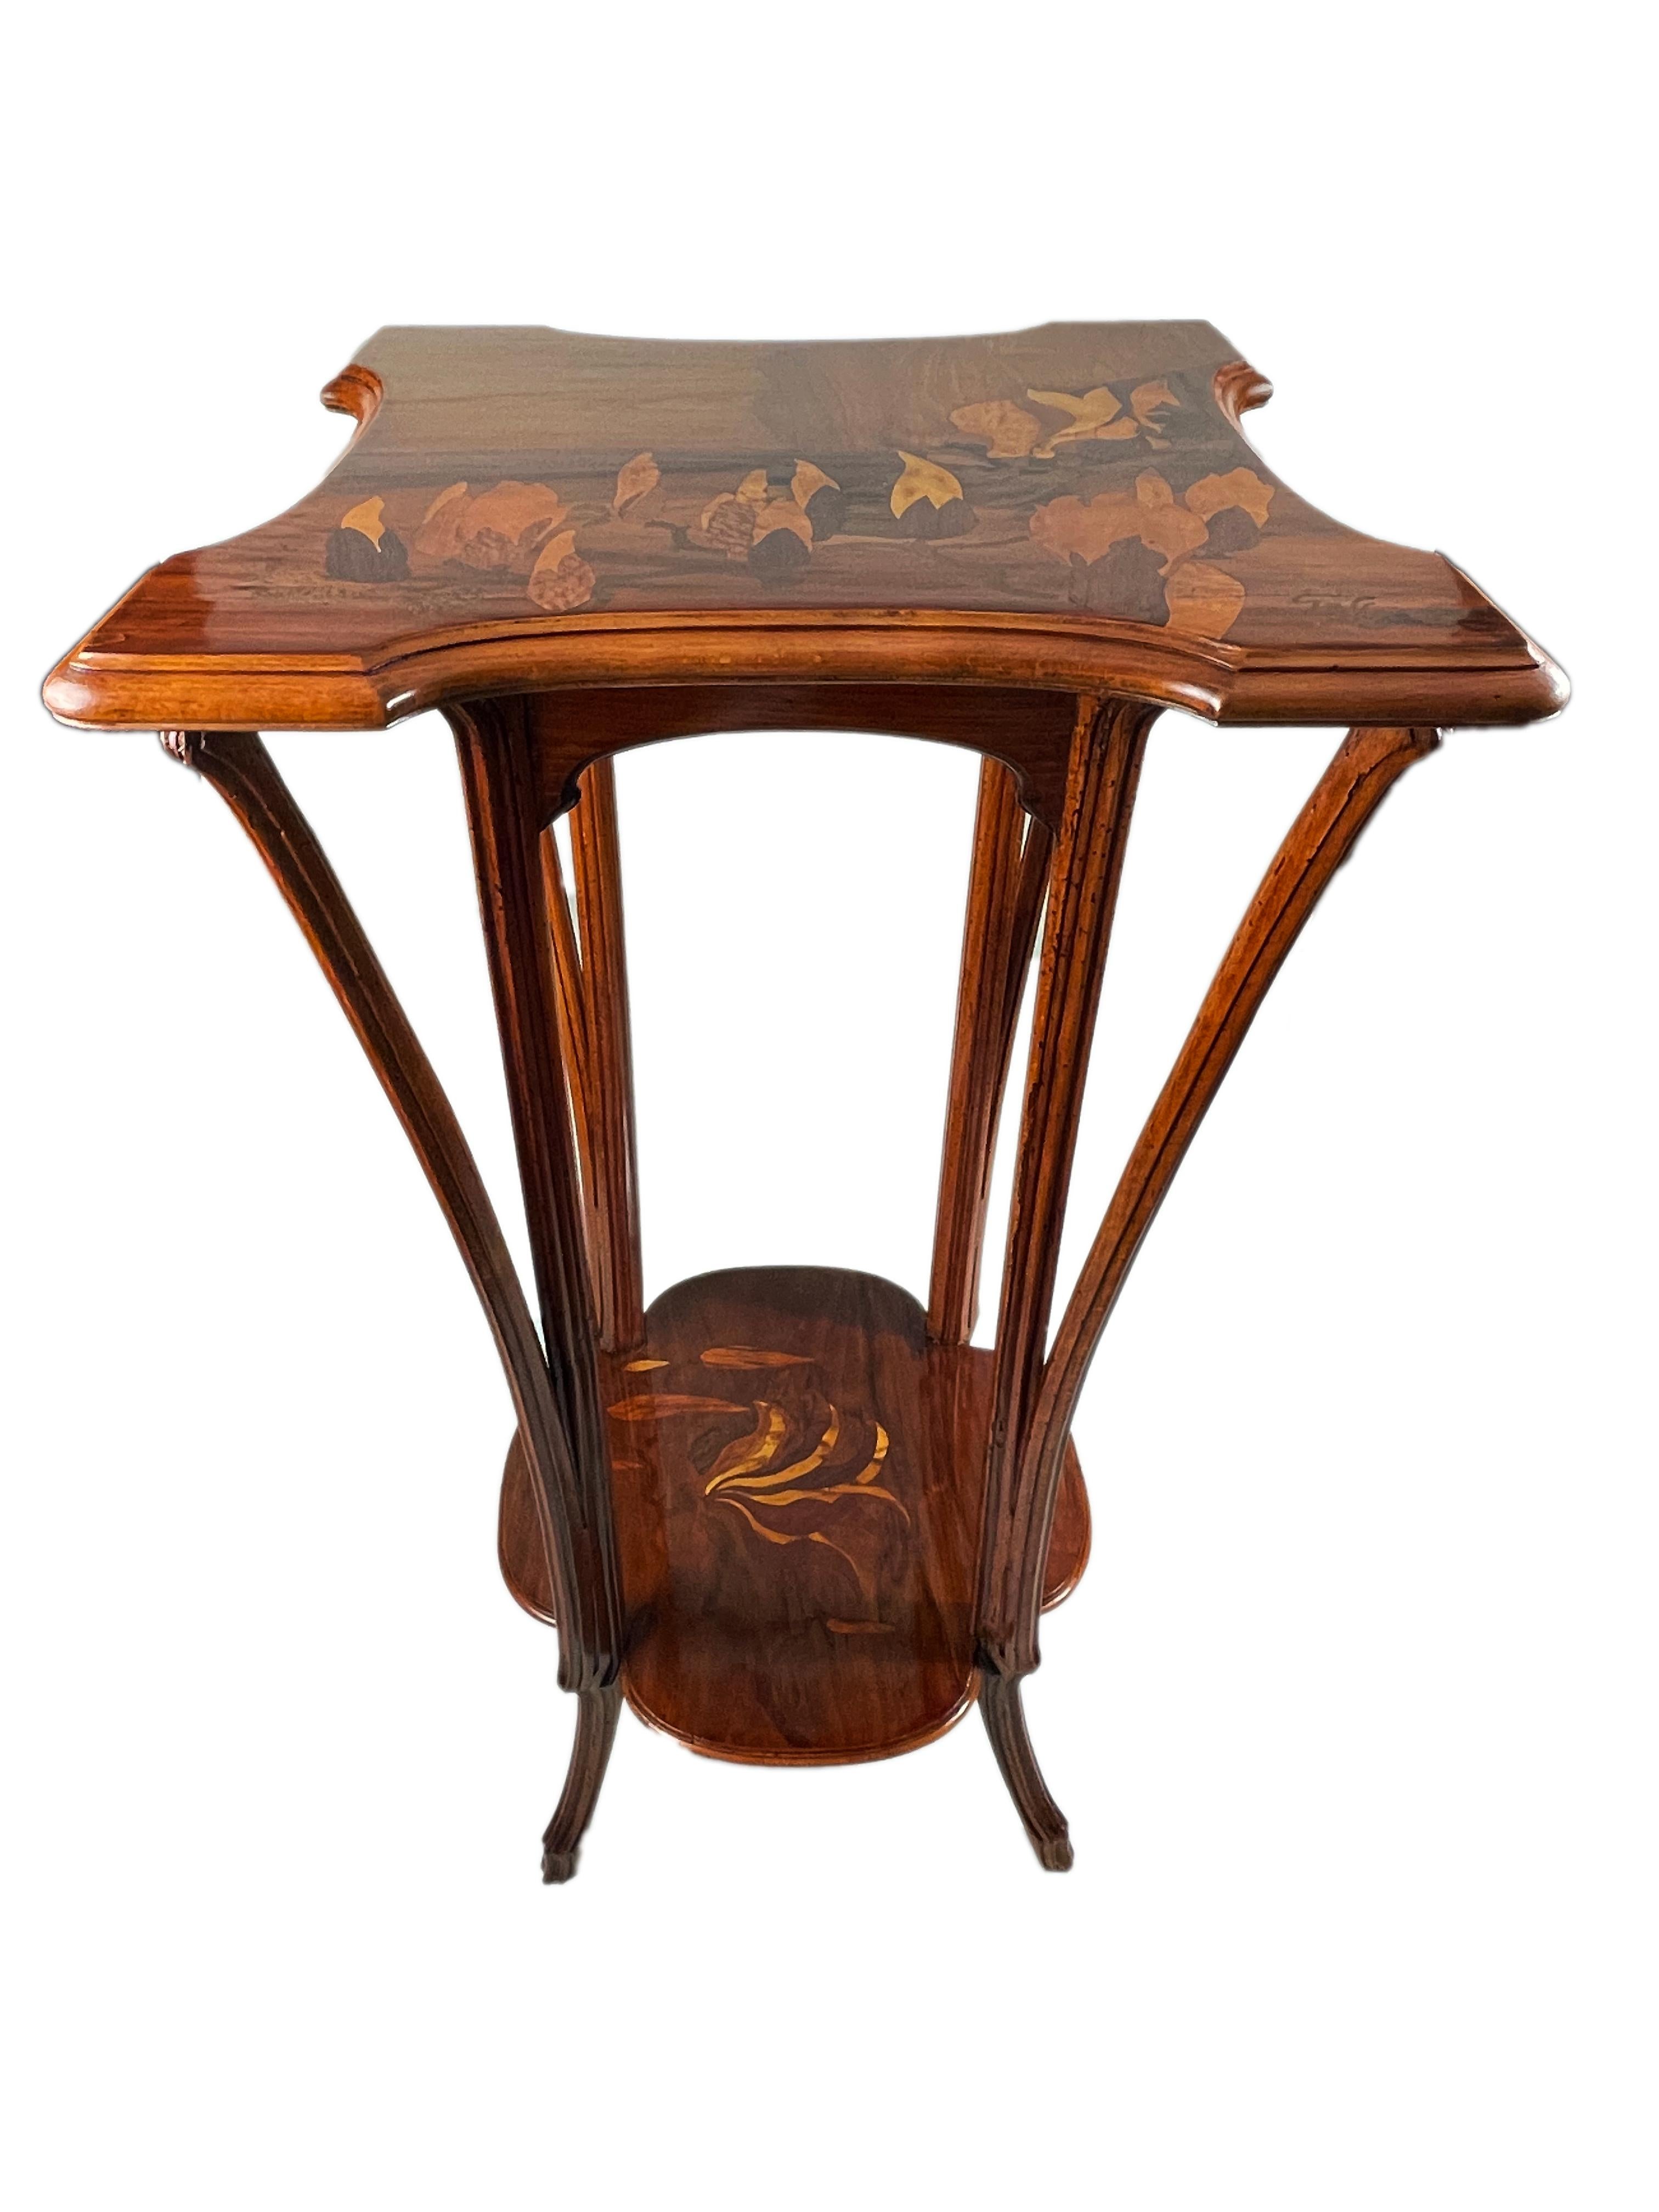 French Art Nouveau Carved Fruitwood & Marquetry Pedestal by, Emile Gallé For Sale 2